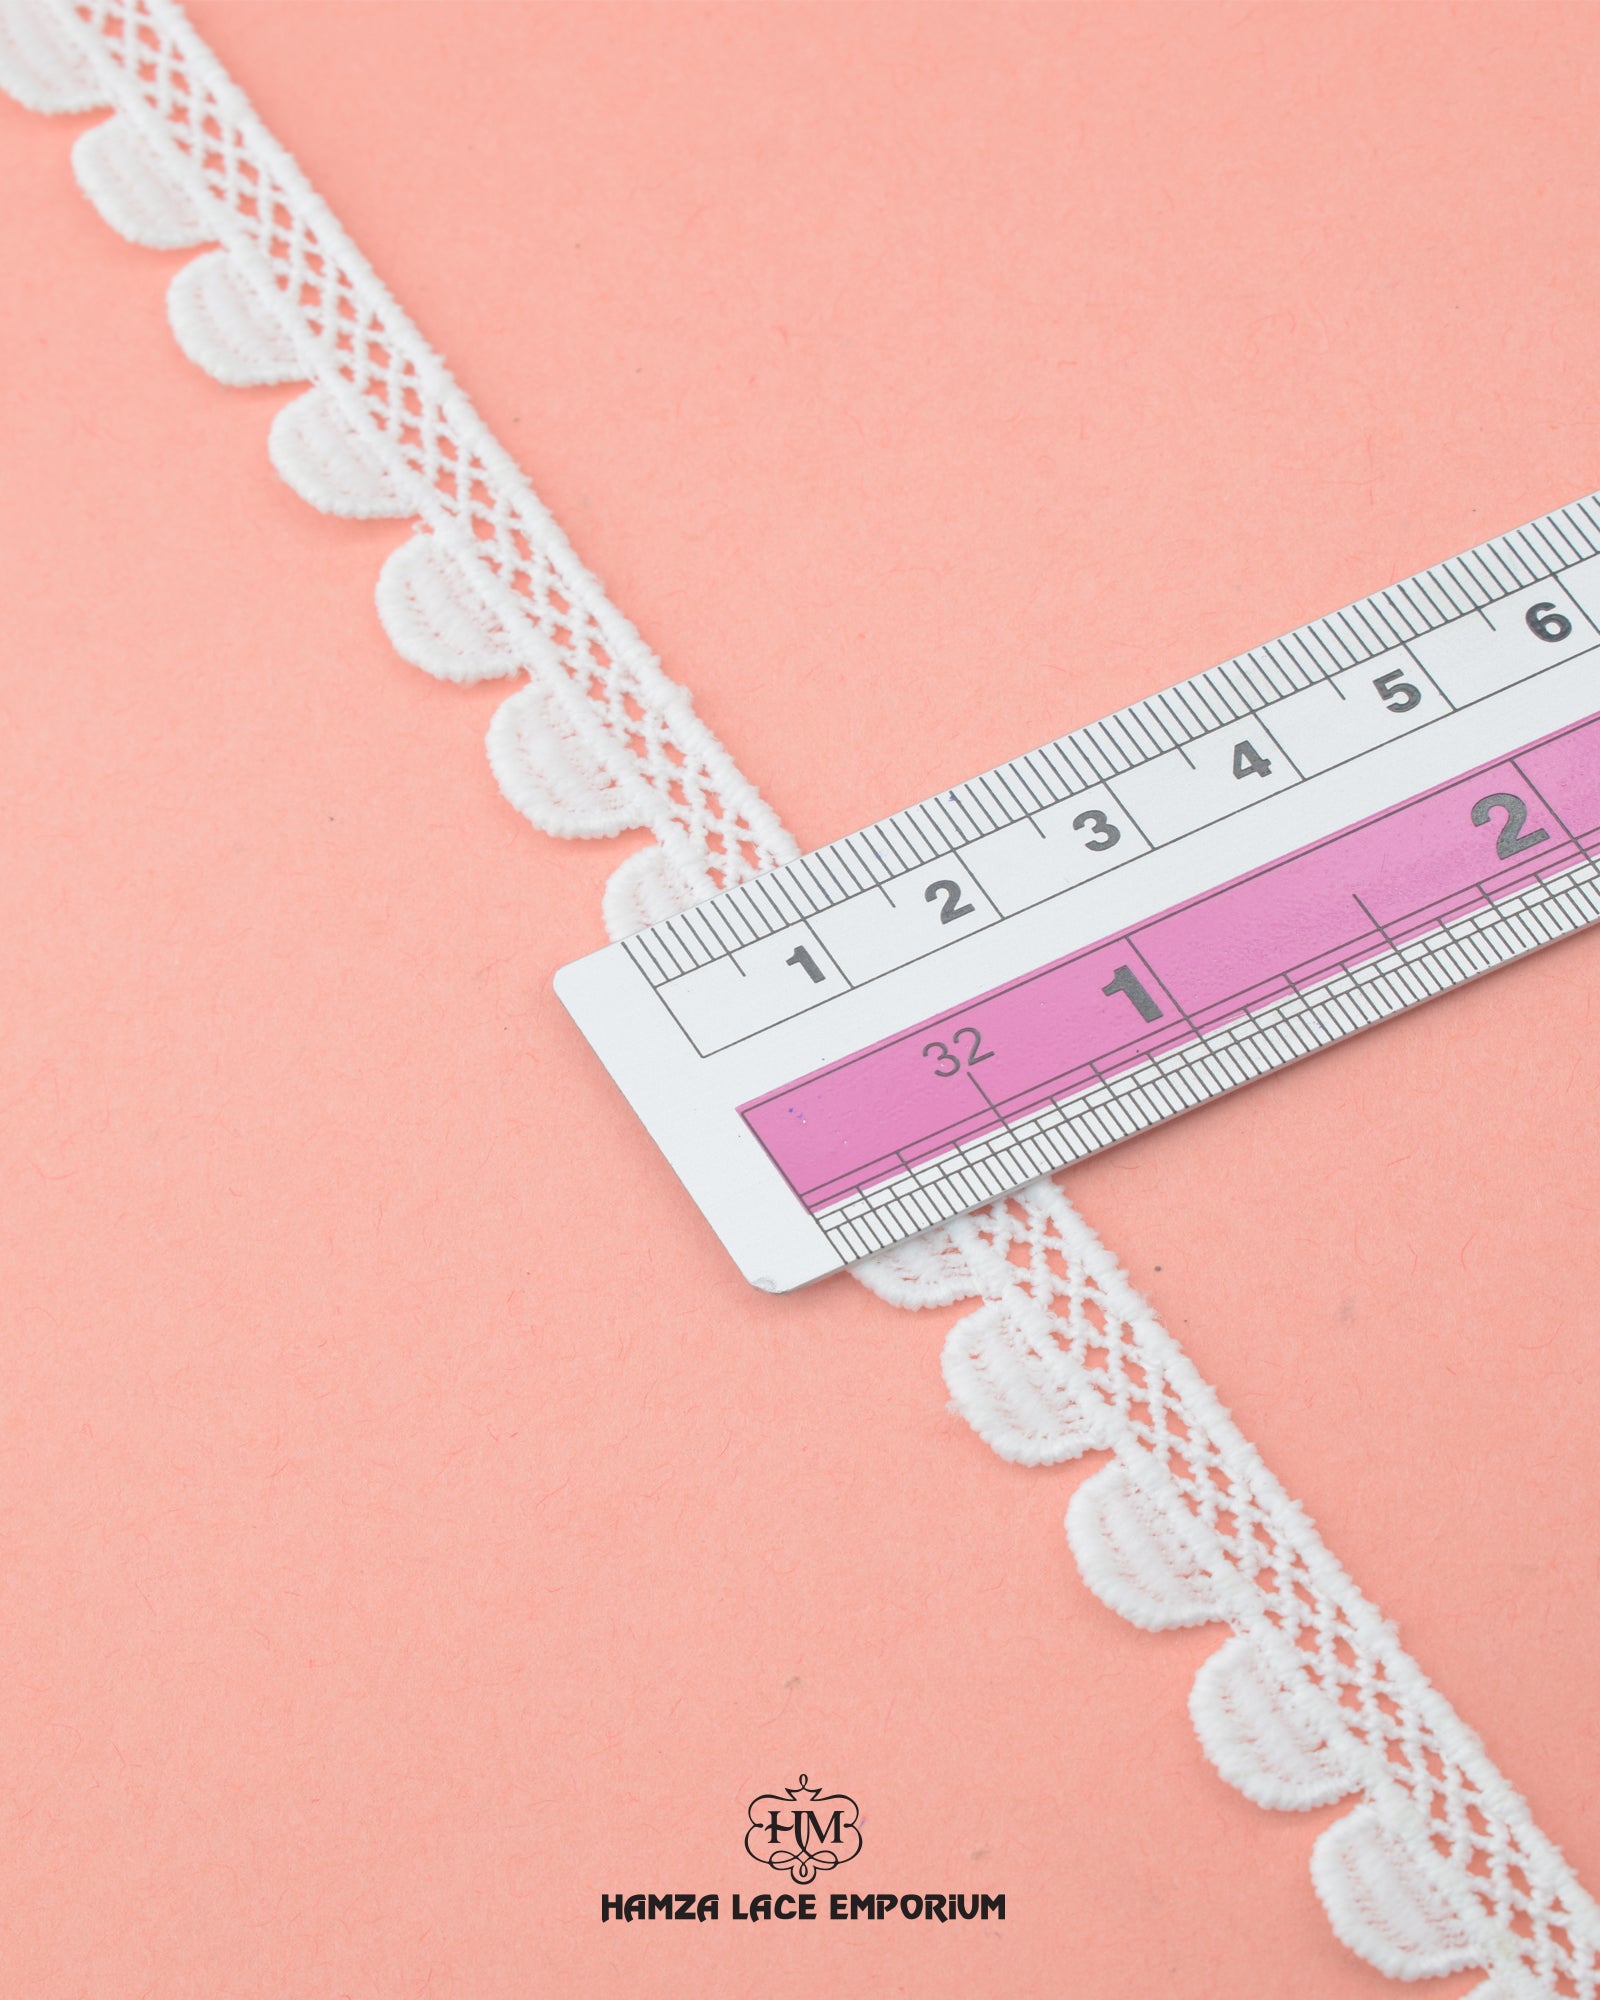 Size of the 'Edging Loop Lace 16808' is shown as '0.5' inches with the help of a ruler